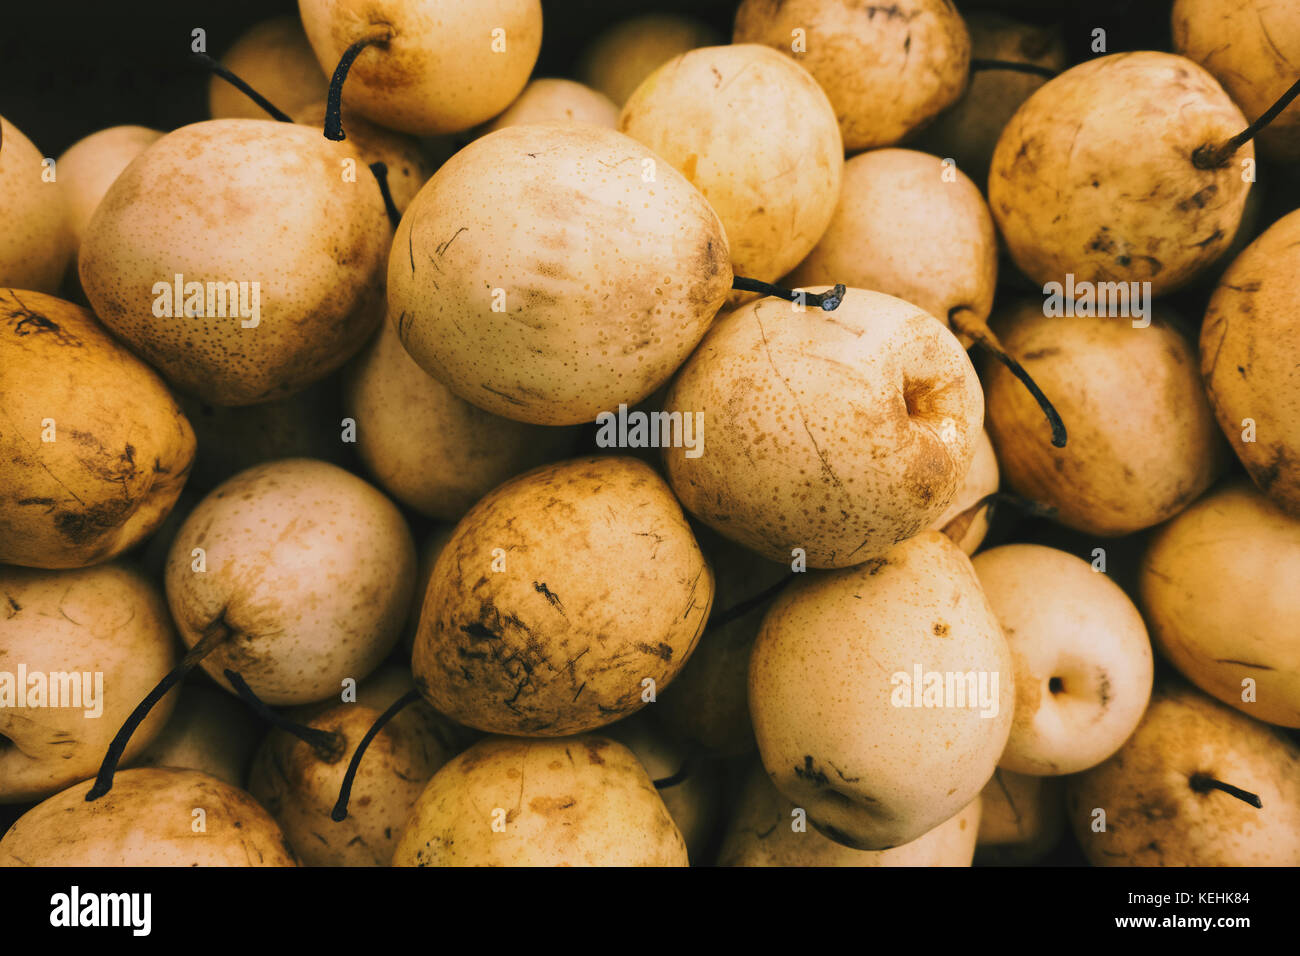 Pile of yellow pears Stock Photo